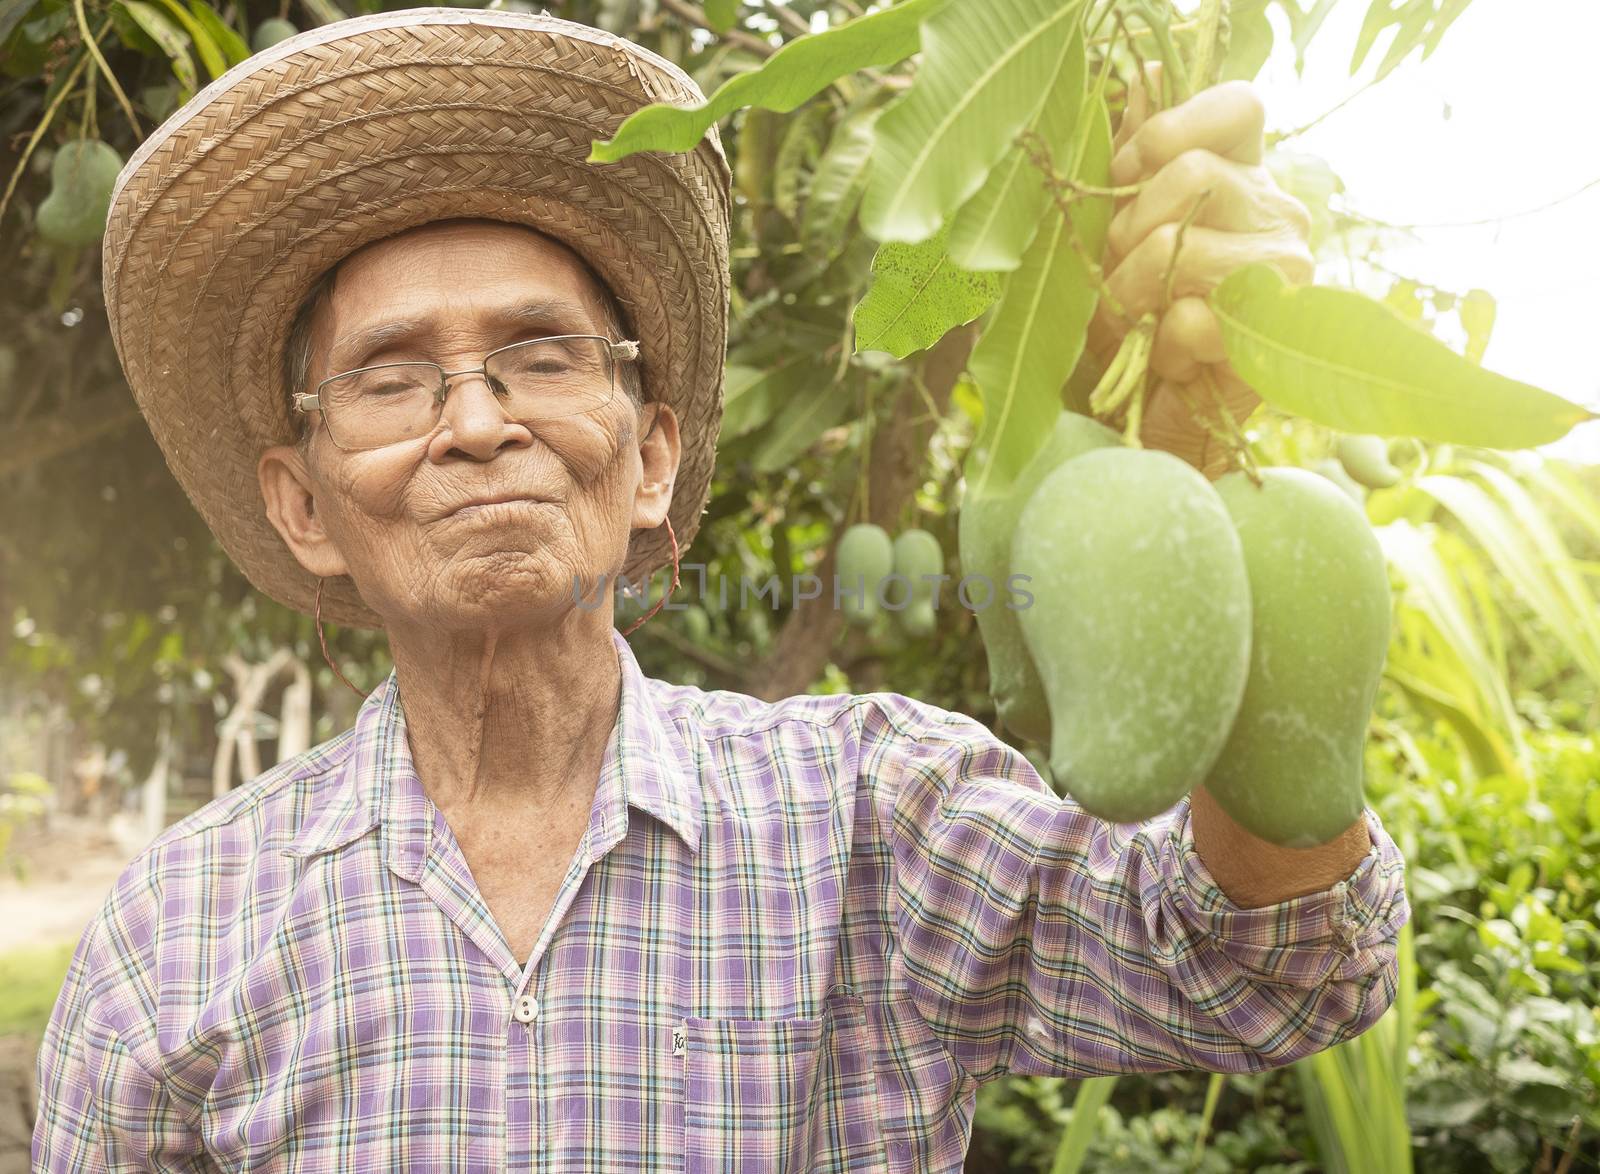 Asian senior gardeners wearing a hat and glasses holding green m by TEERASAK